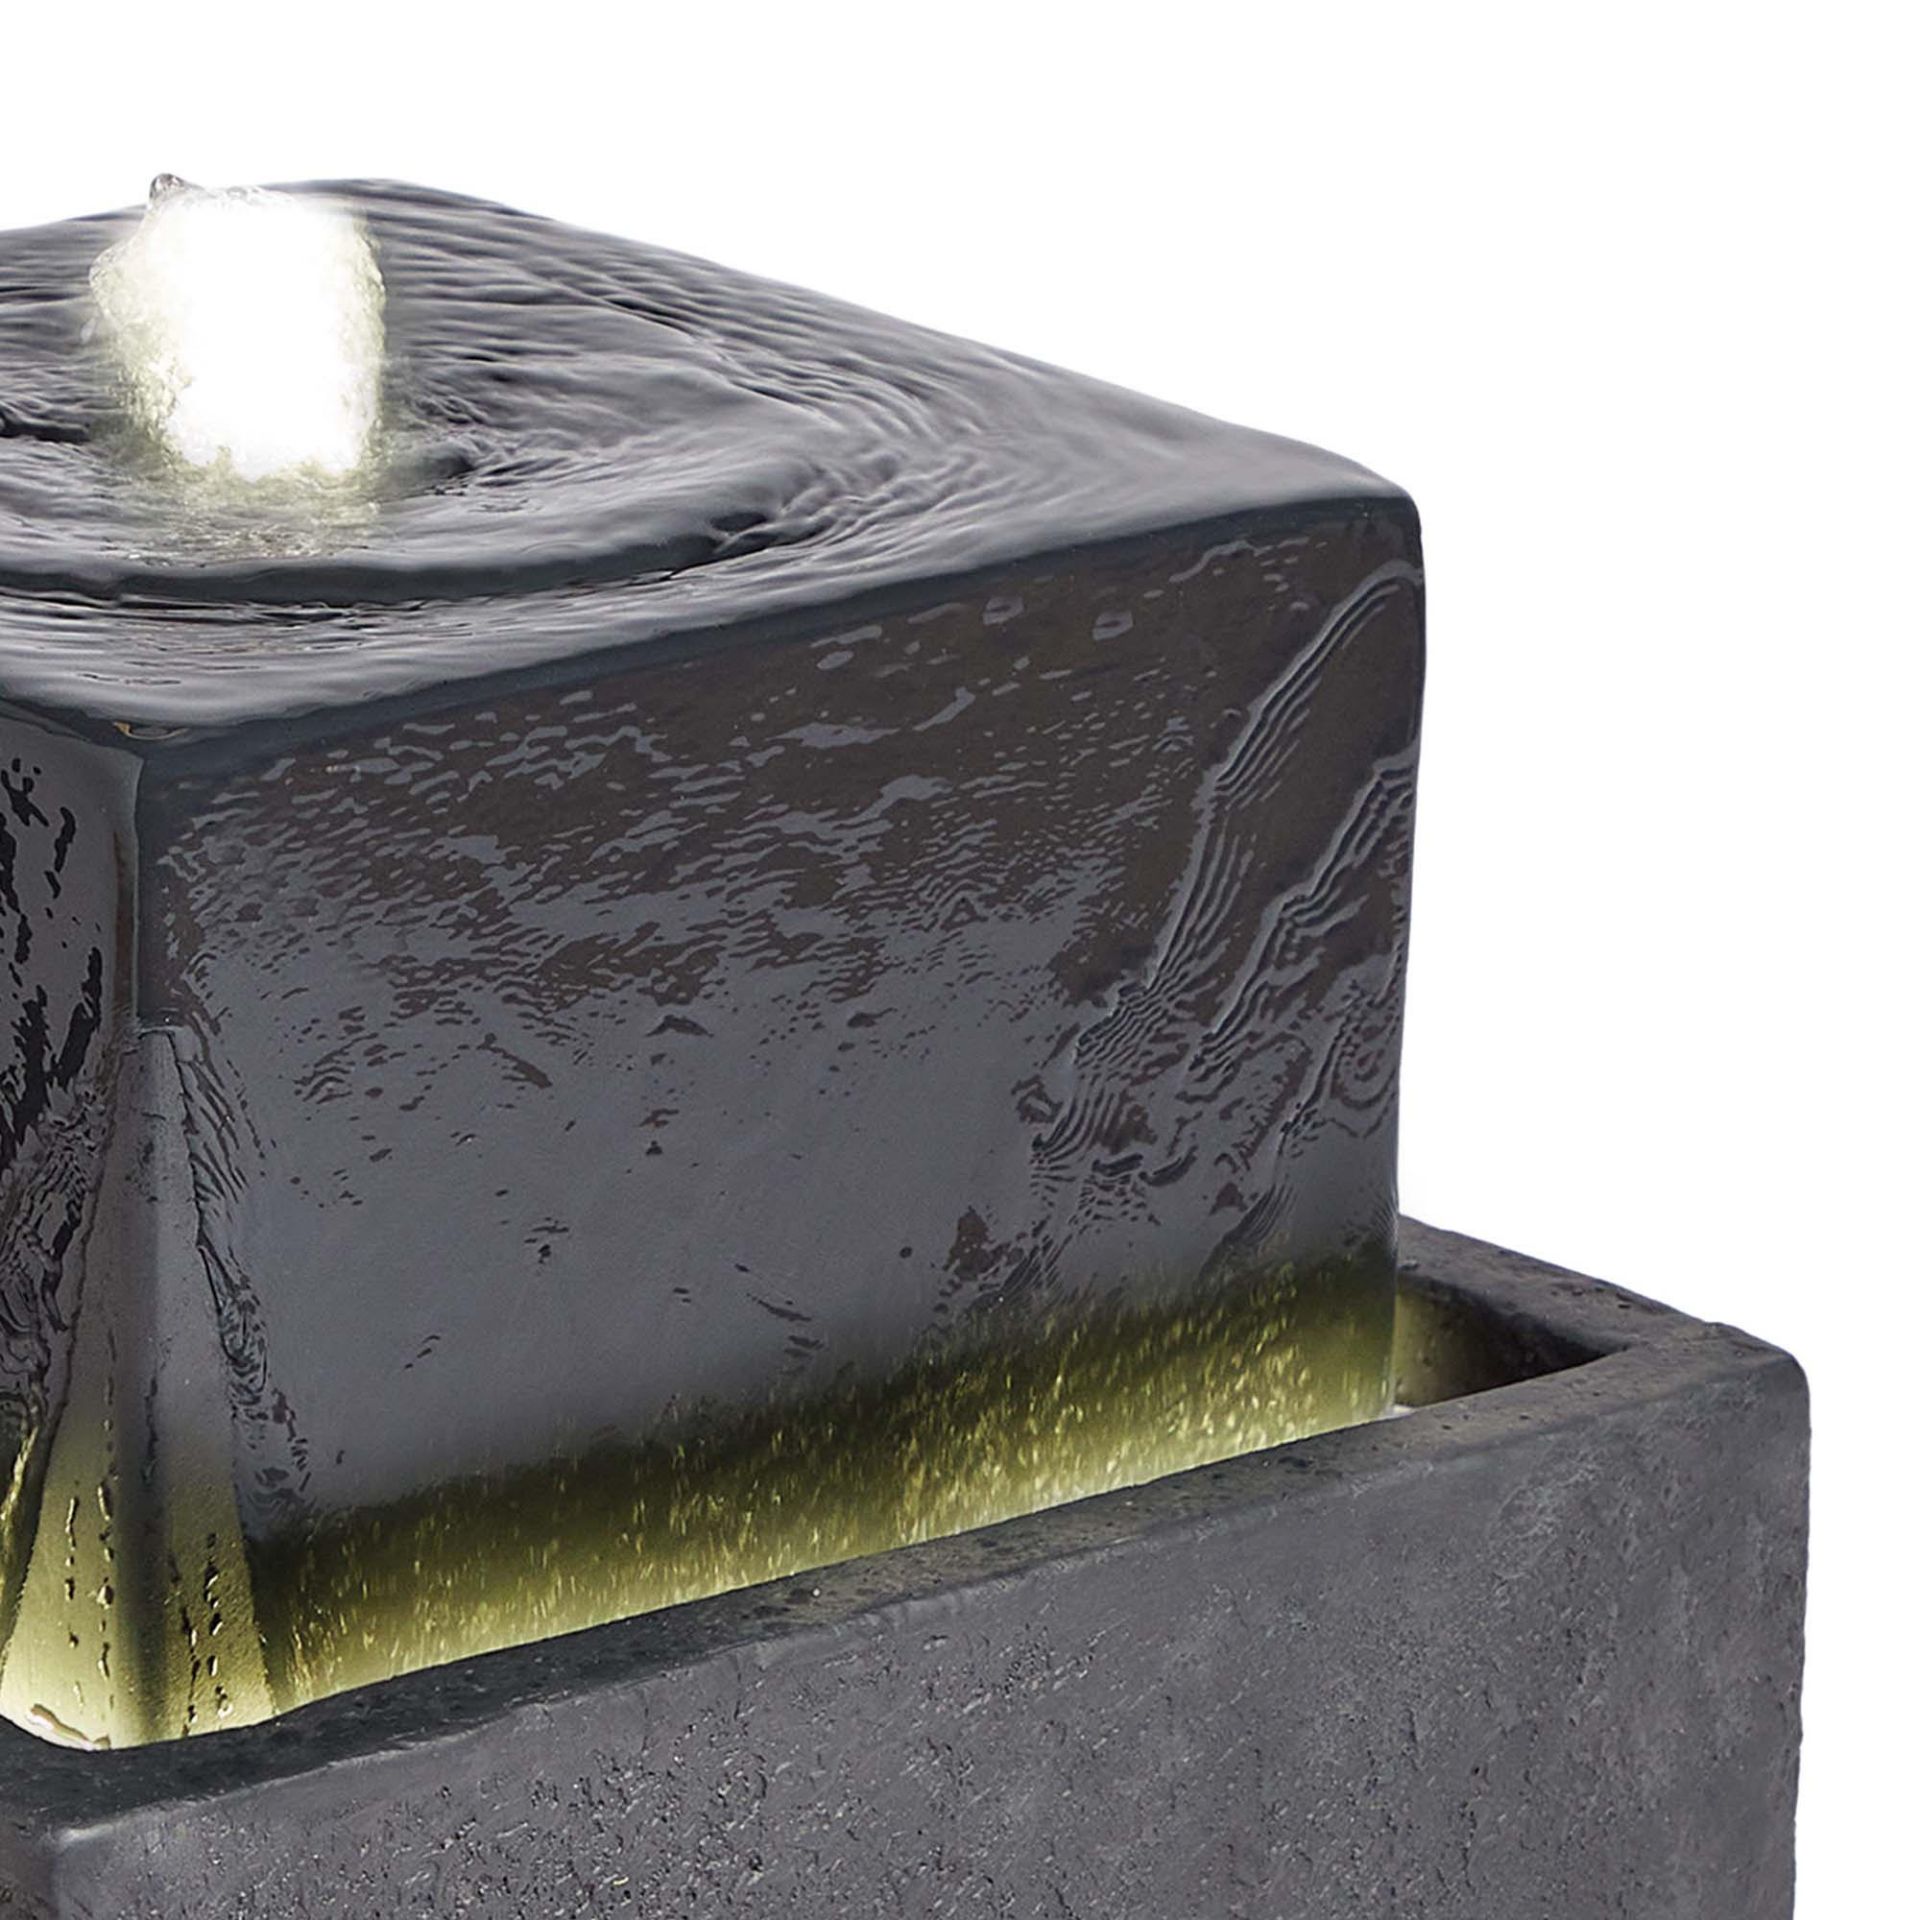 Trade Lot 5 x New & Boxed Square 2 Tier Water Feature. RRP £299.99. (REF671) – Indoor and Outdoor - Image 4 of 7